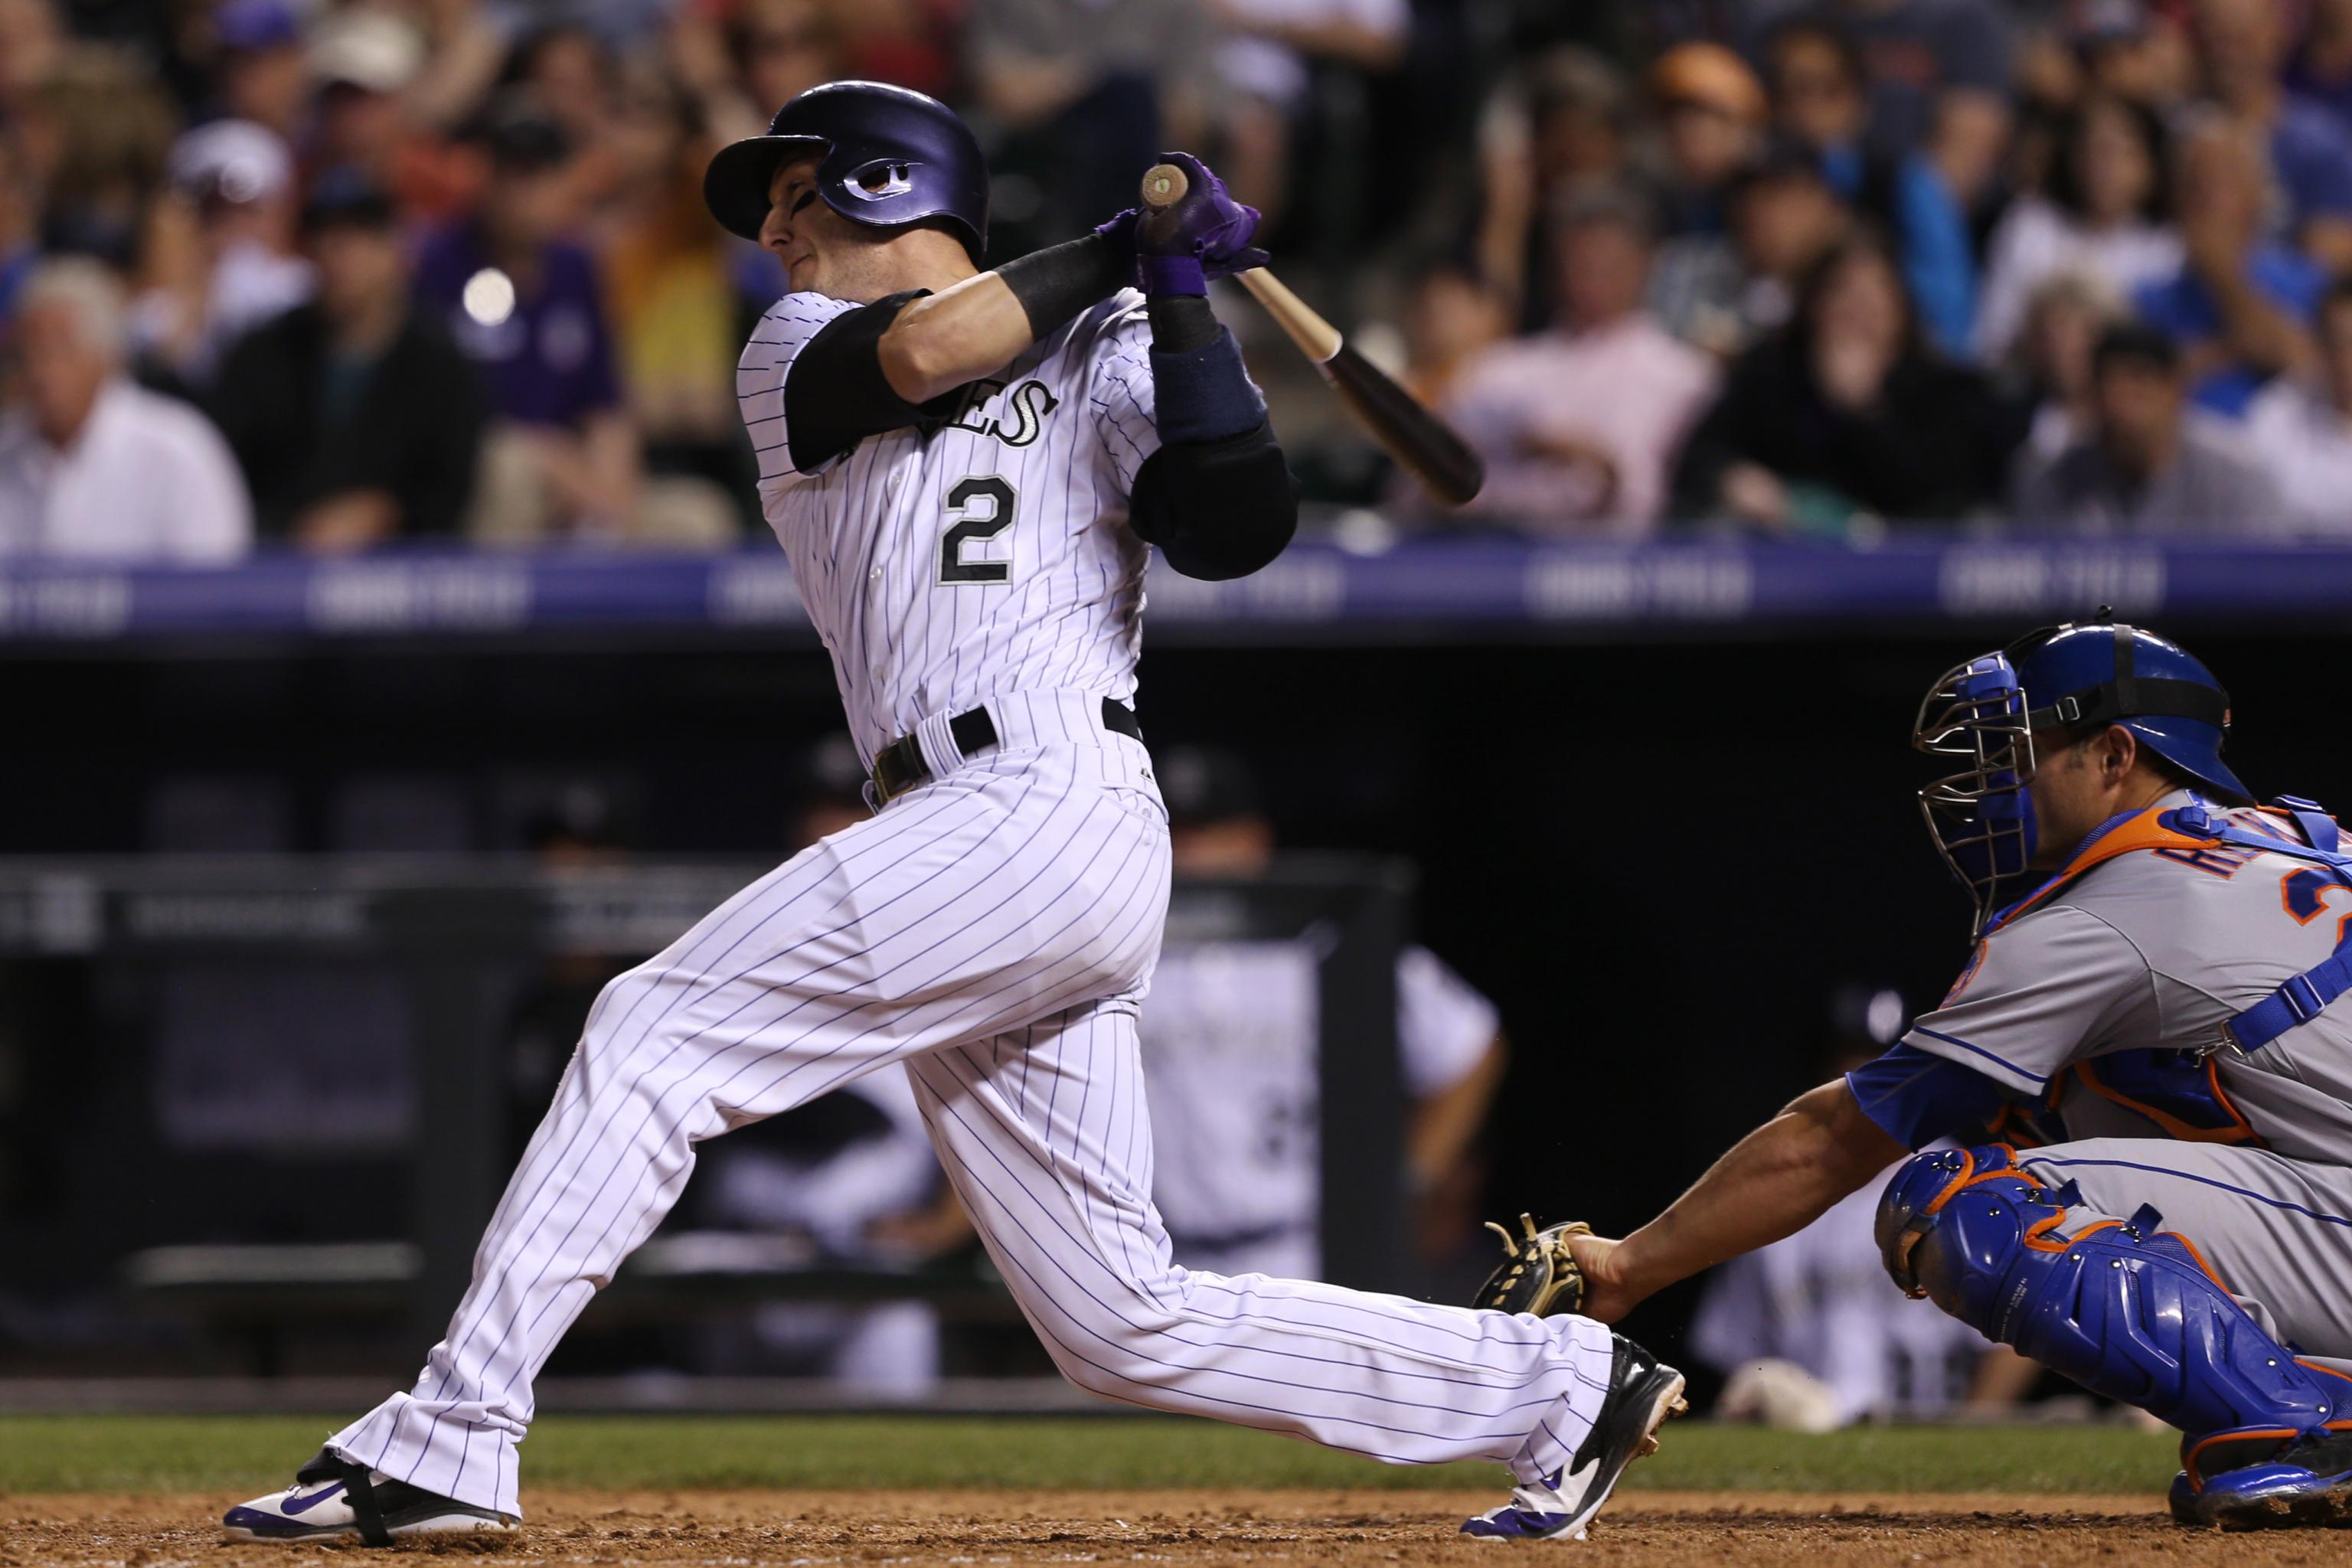 Rockies VP on Troy Tulowitzki: 'He's not going anywhere, period